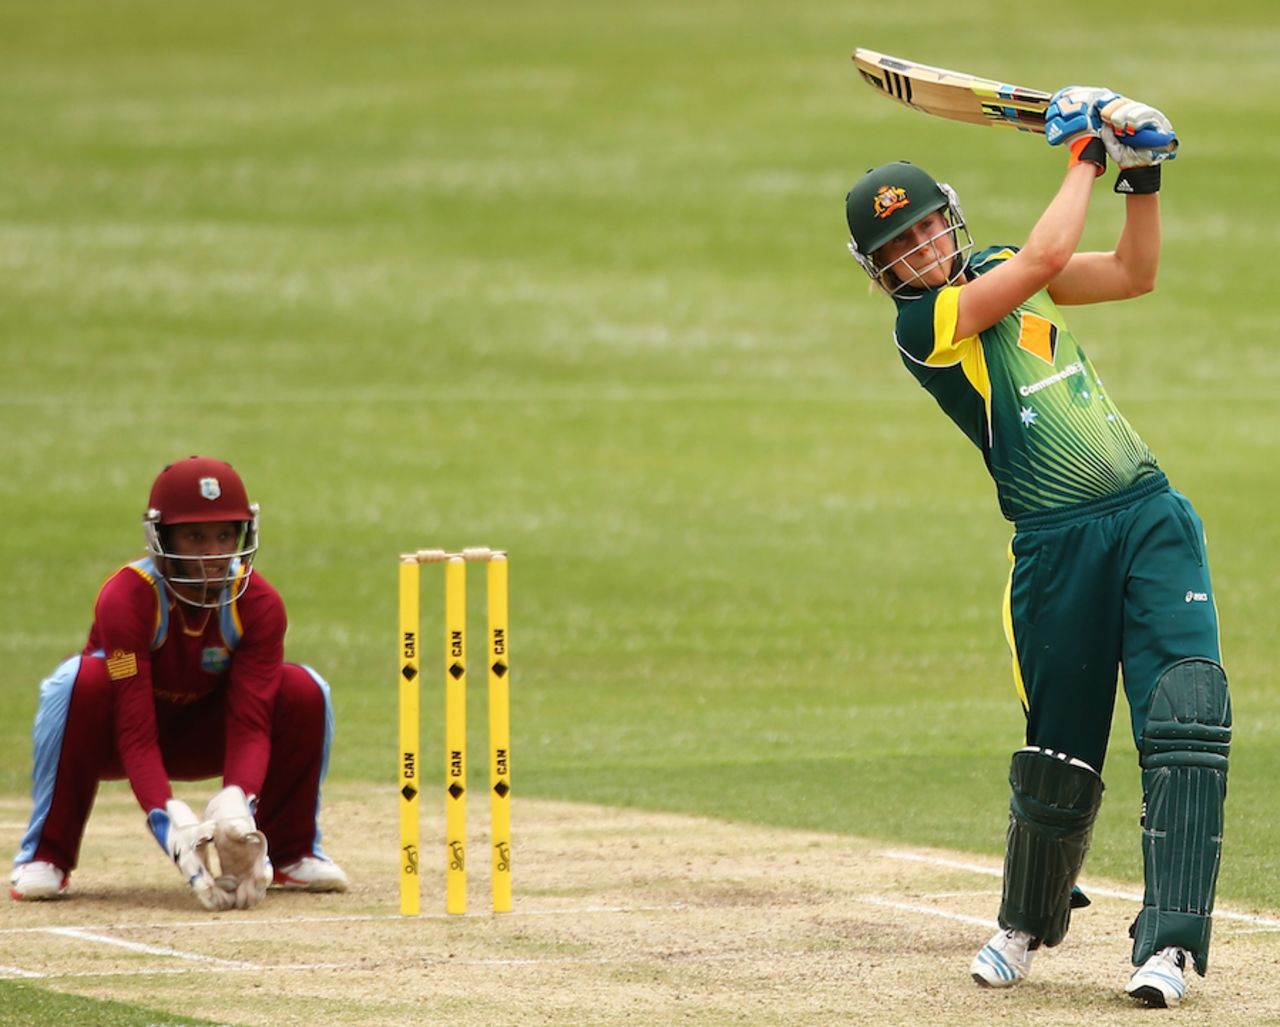 Ellyse Perry launches one down the ground, Australia v West Indies, ICC Women's Championship, Sydney, November 13, 2014